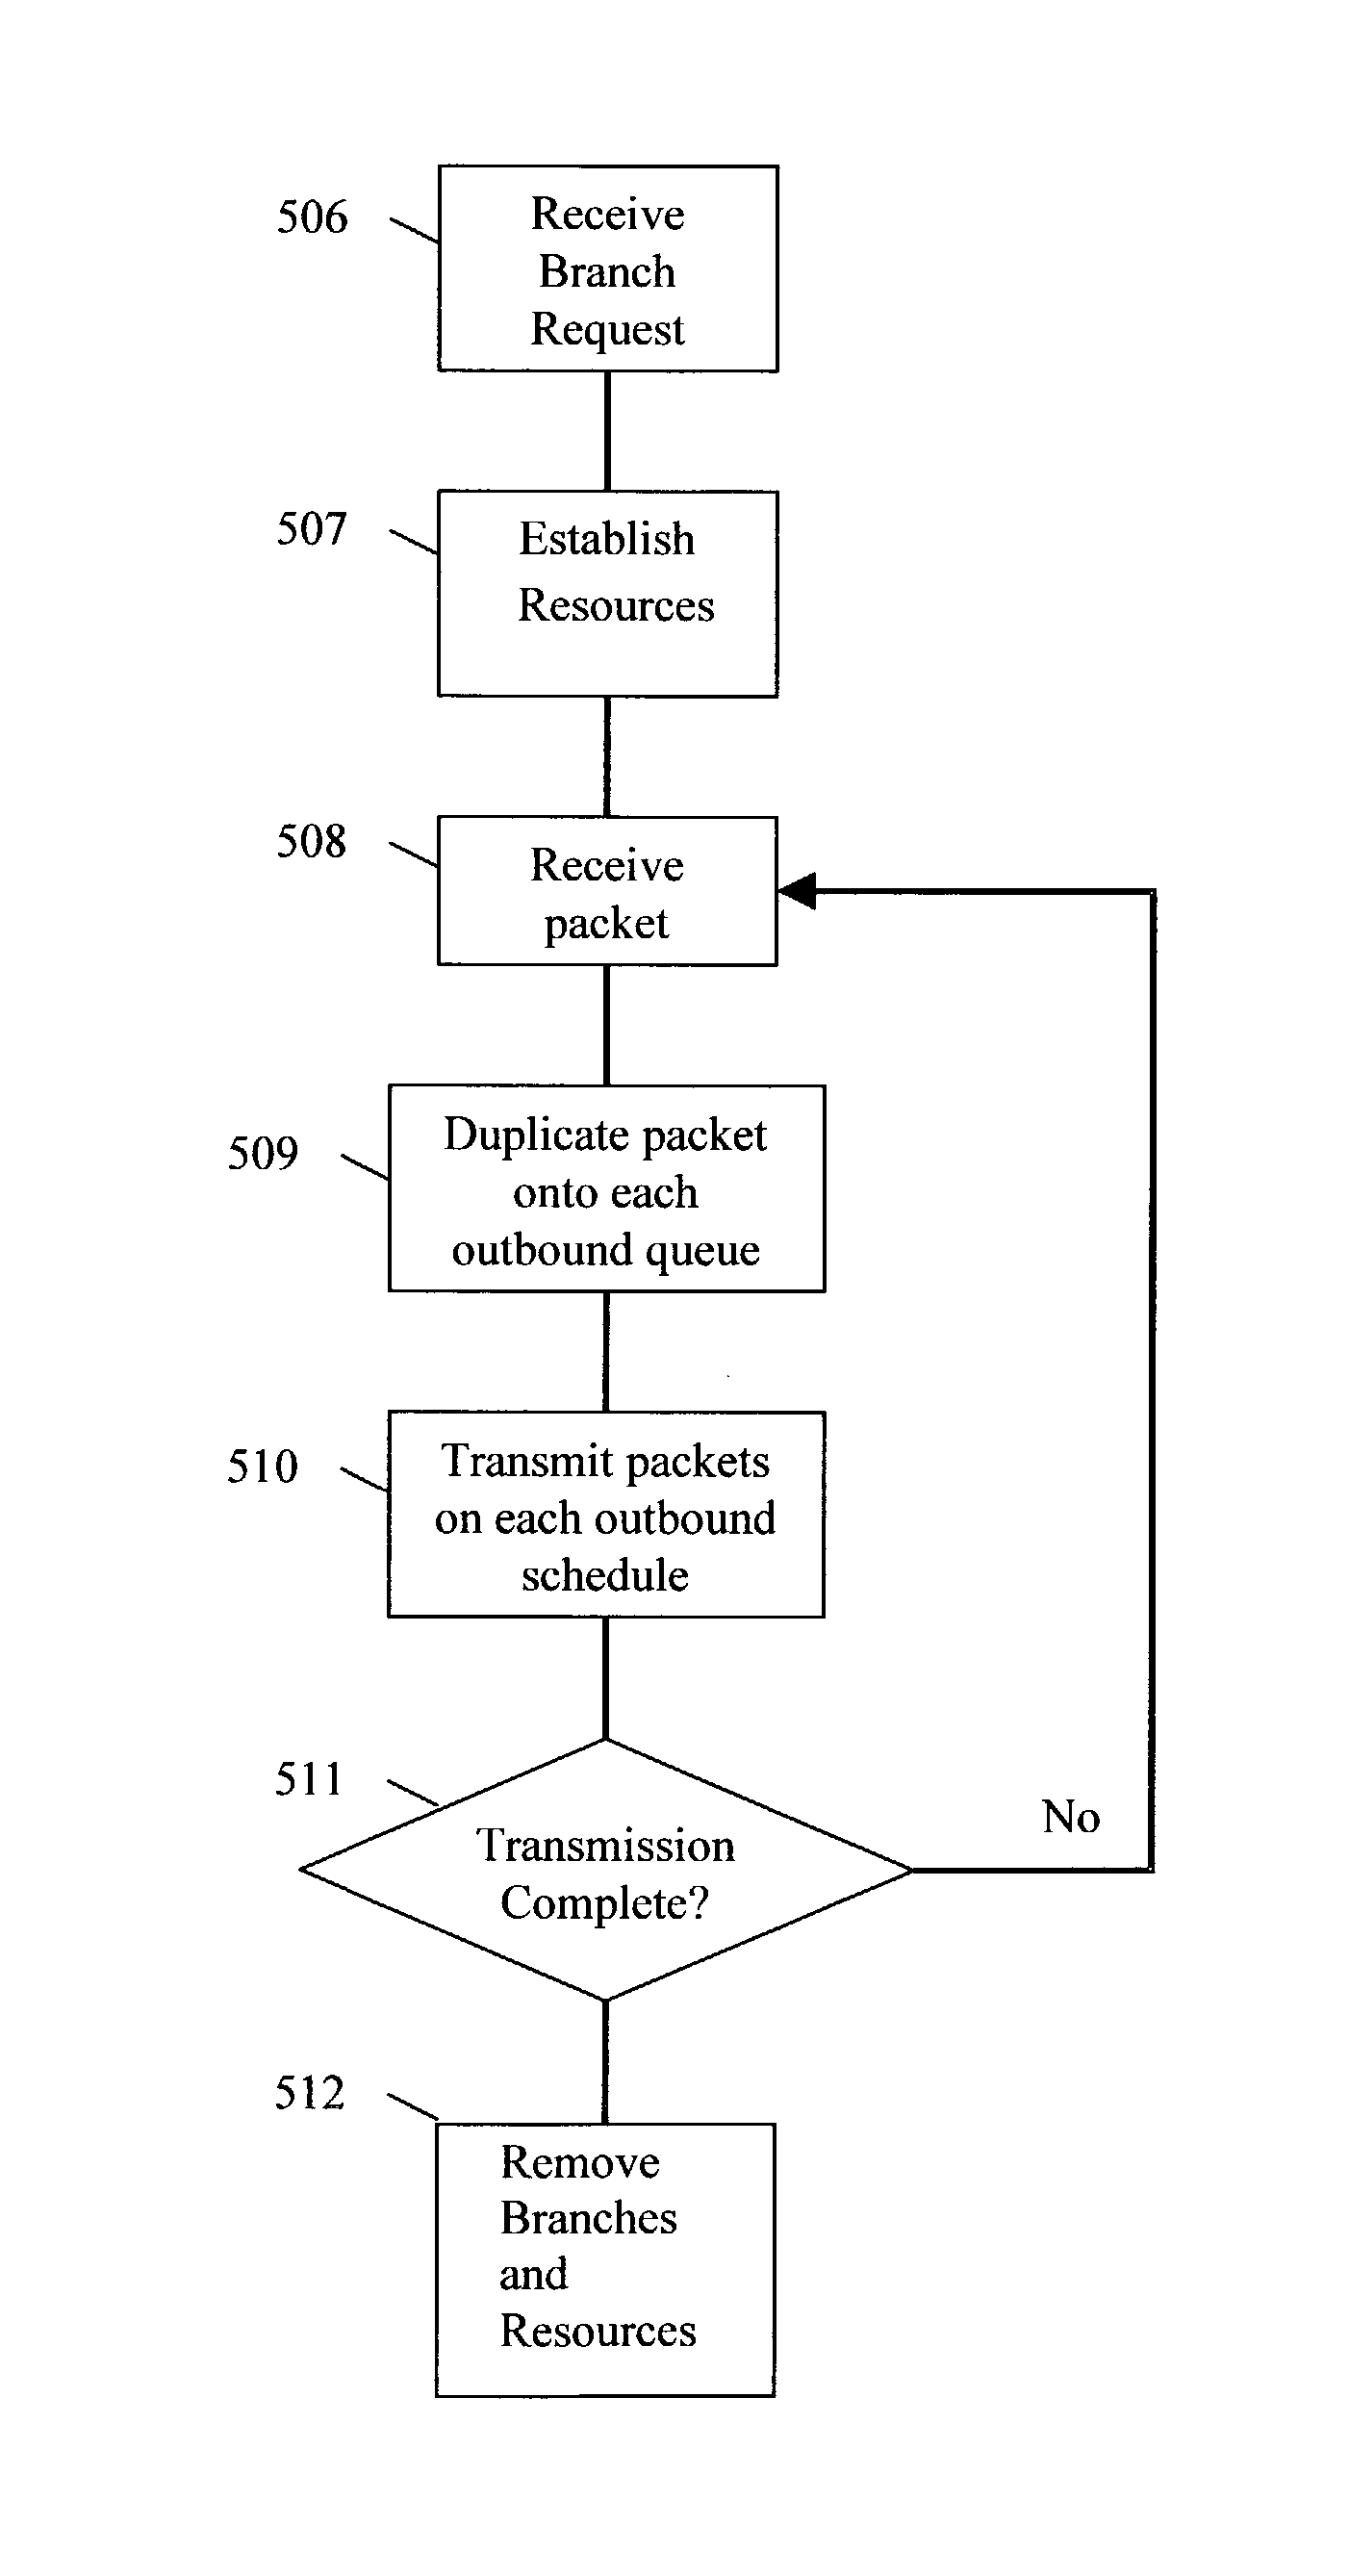 Generation of redundant scheduled network paths using a branch and merge technique